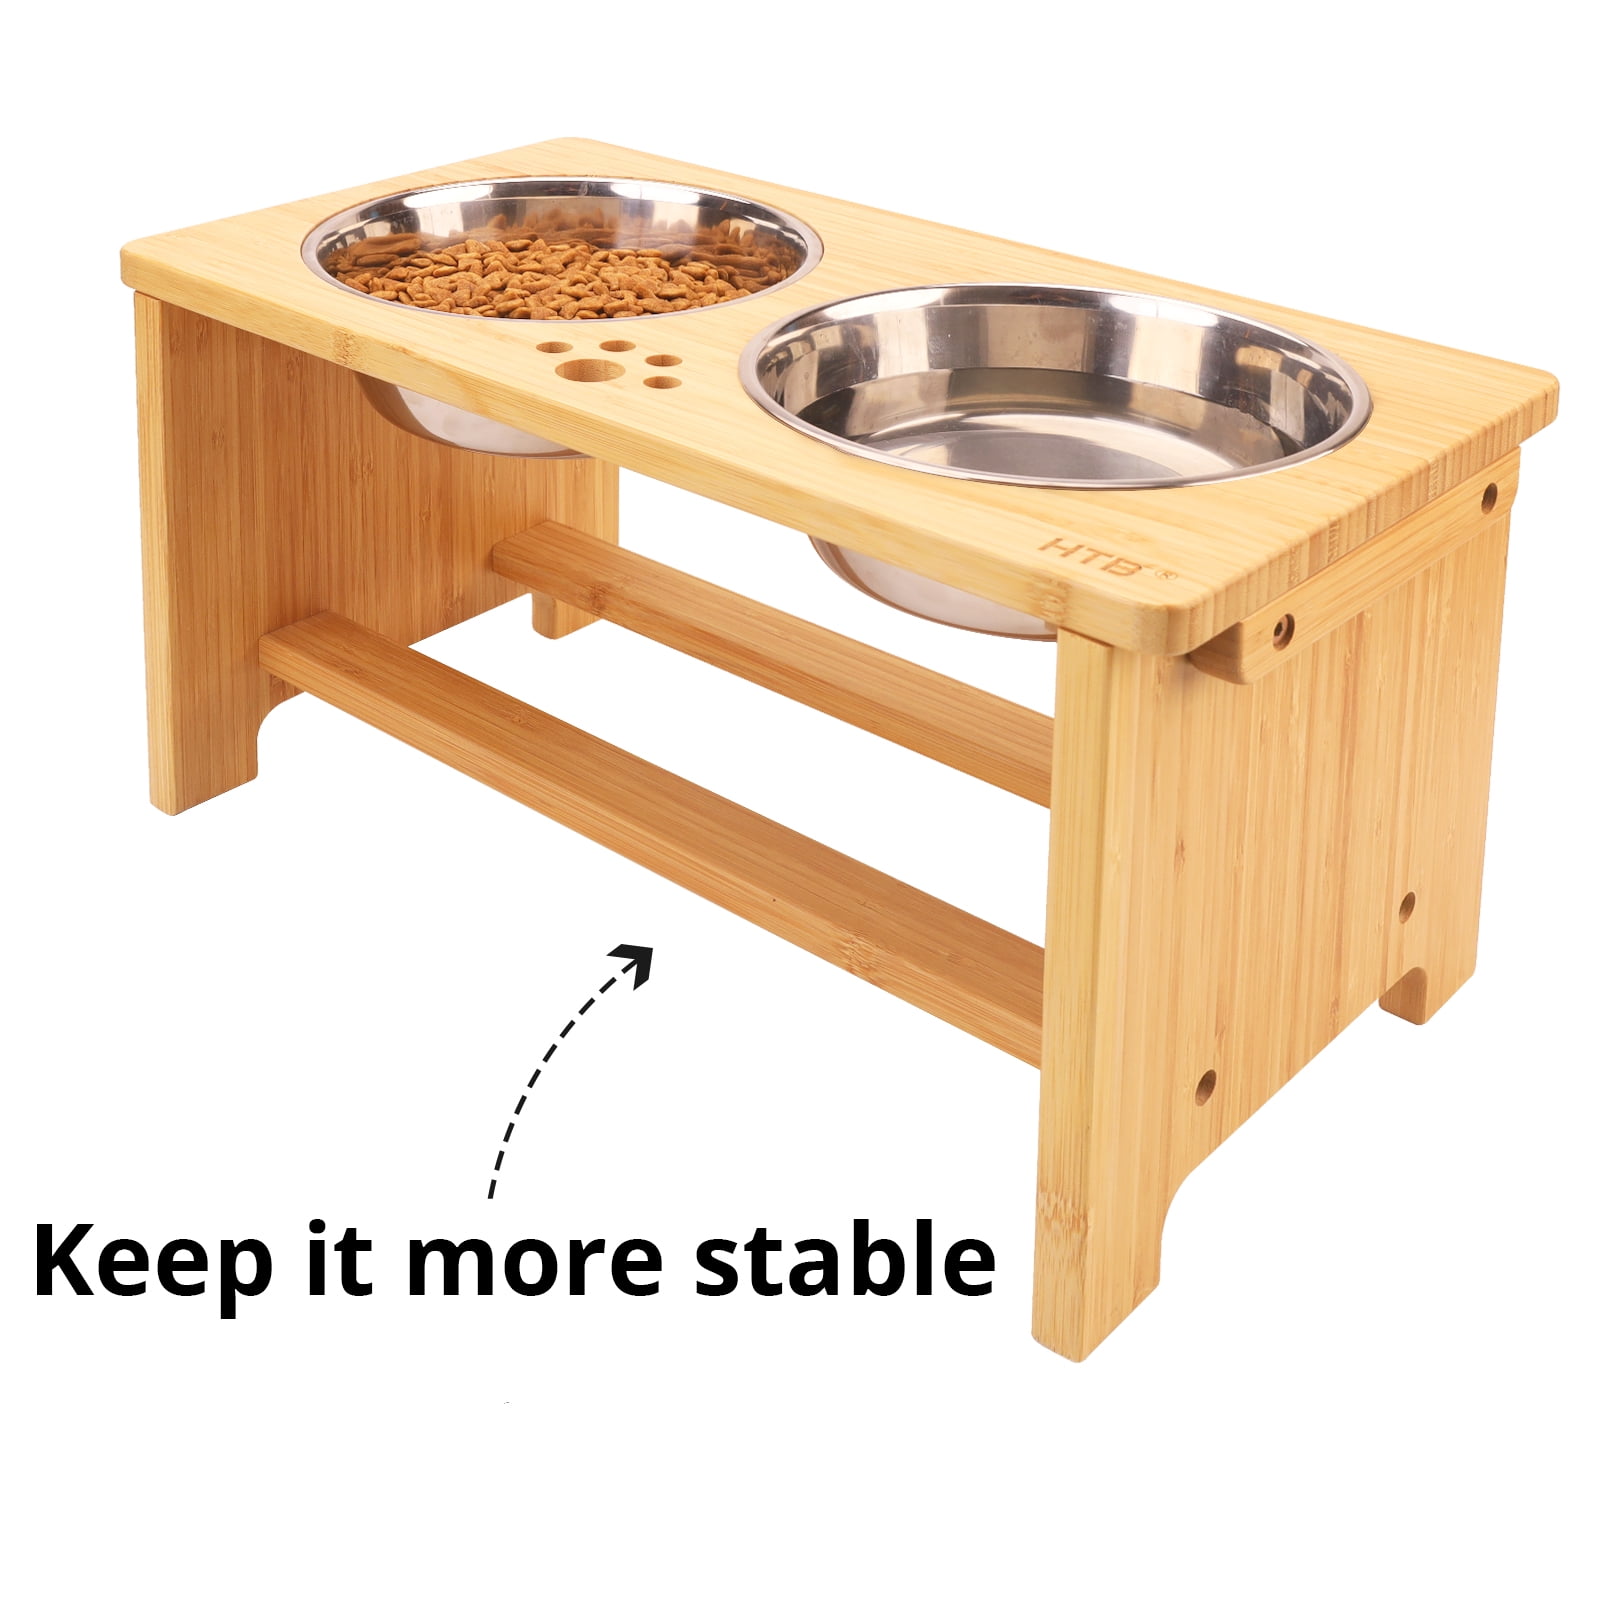 HTB Elevated Dog Bowls,Adjustable Dog Bowl Stand Adjusts to 2  Heights,7.5'',11.8'',Raised Dog Food and Water Bowls for Medium and Large  Dogs